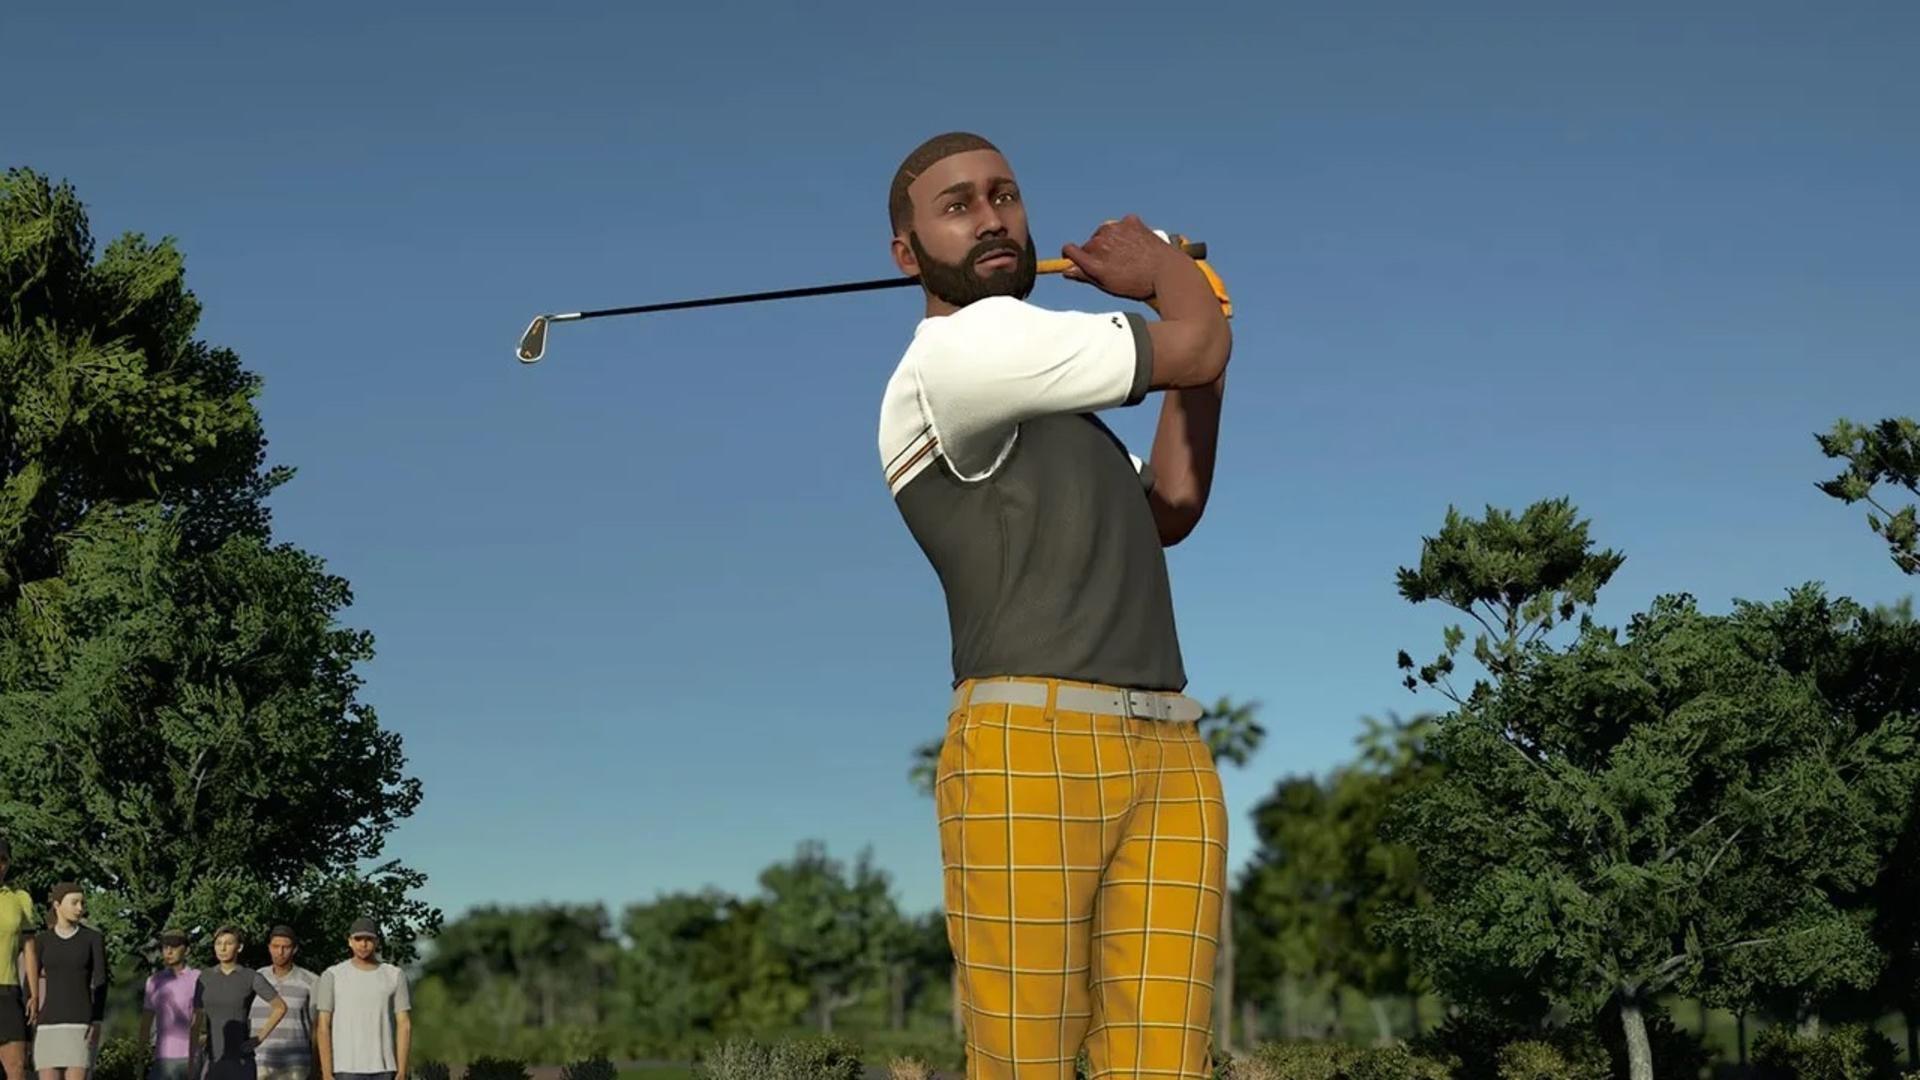 PGA Tour 2k21 will tee off in August